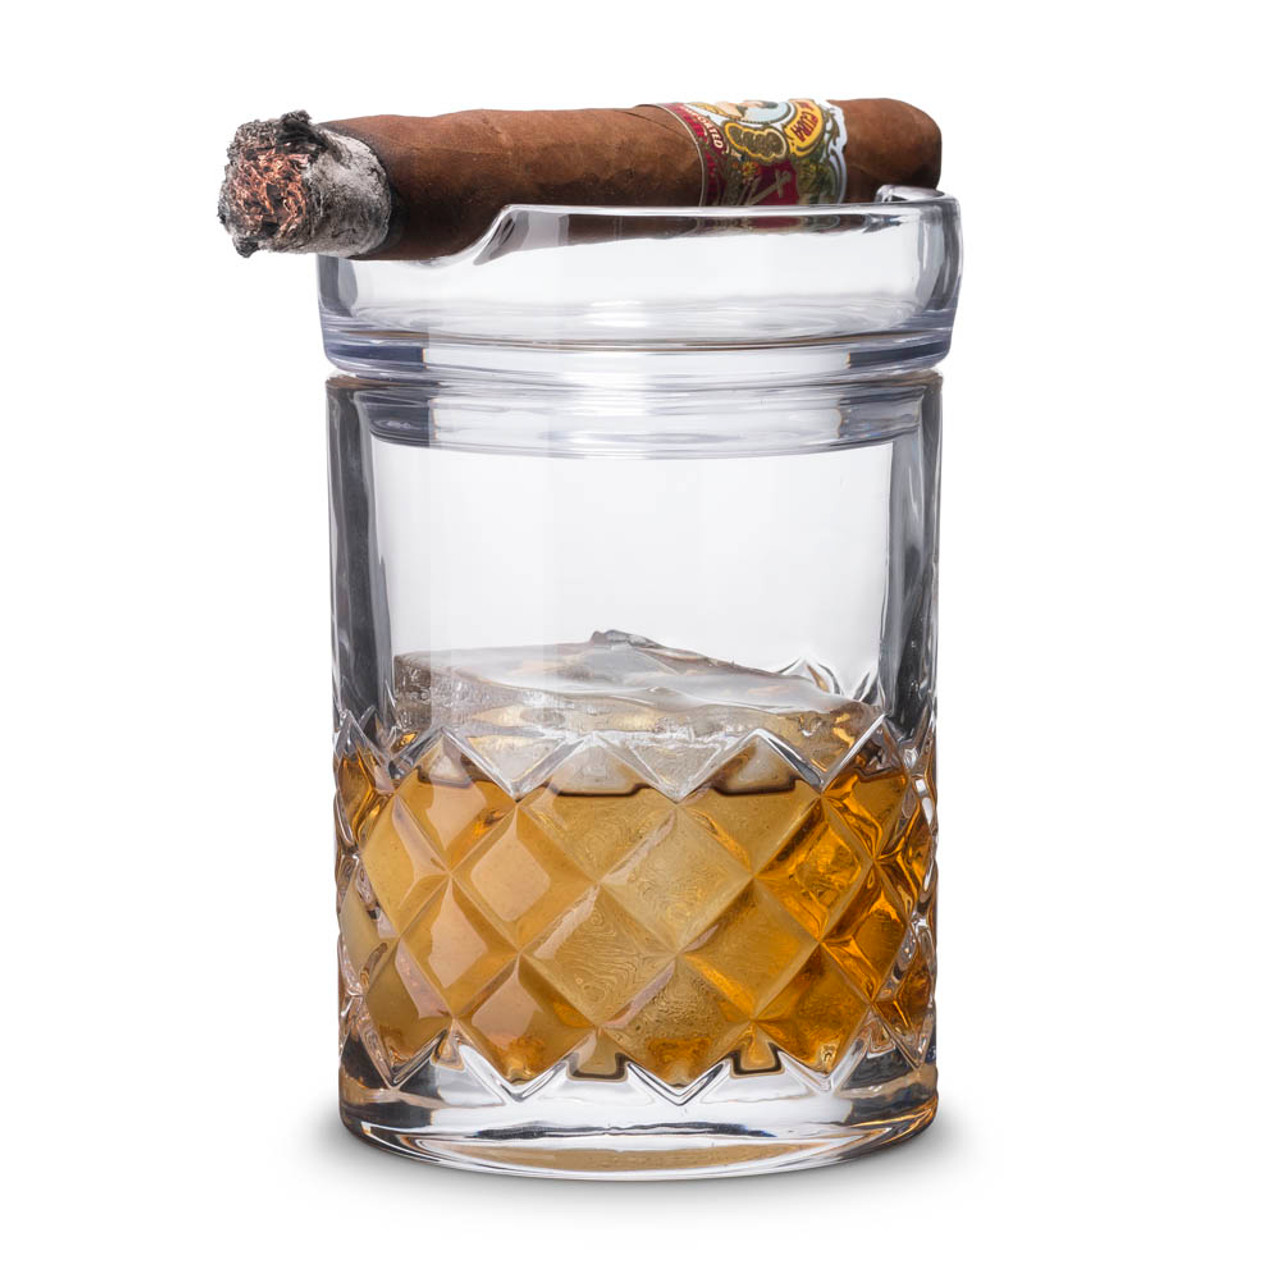 https://cdn11.bigcommerce.com/s-cznxq08r7/images/stencil/1280x1280/products/3493/13139/48725-Godinger-Whiskey--Cigar-Gift-Set-Includes-Rocks-Glass-with-Cigar-Ashtray-01__47746.1612202434.jpg?c=1